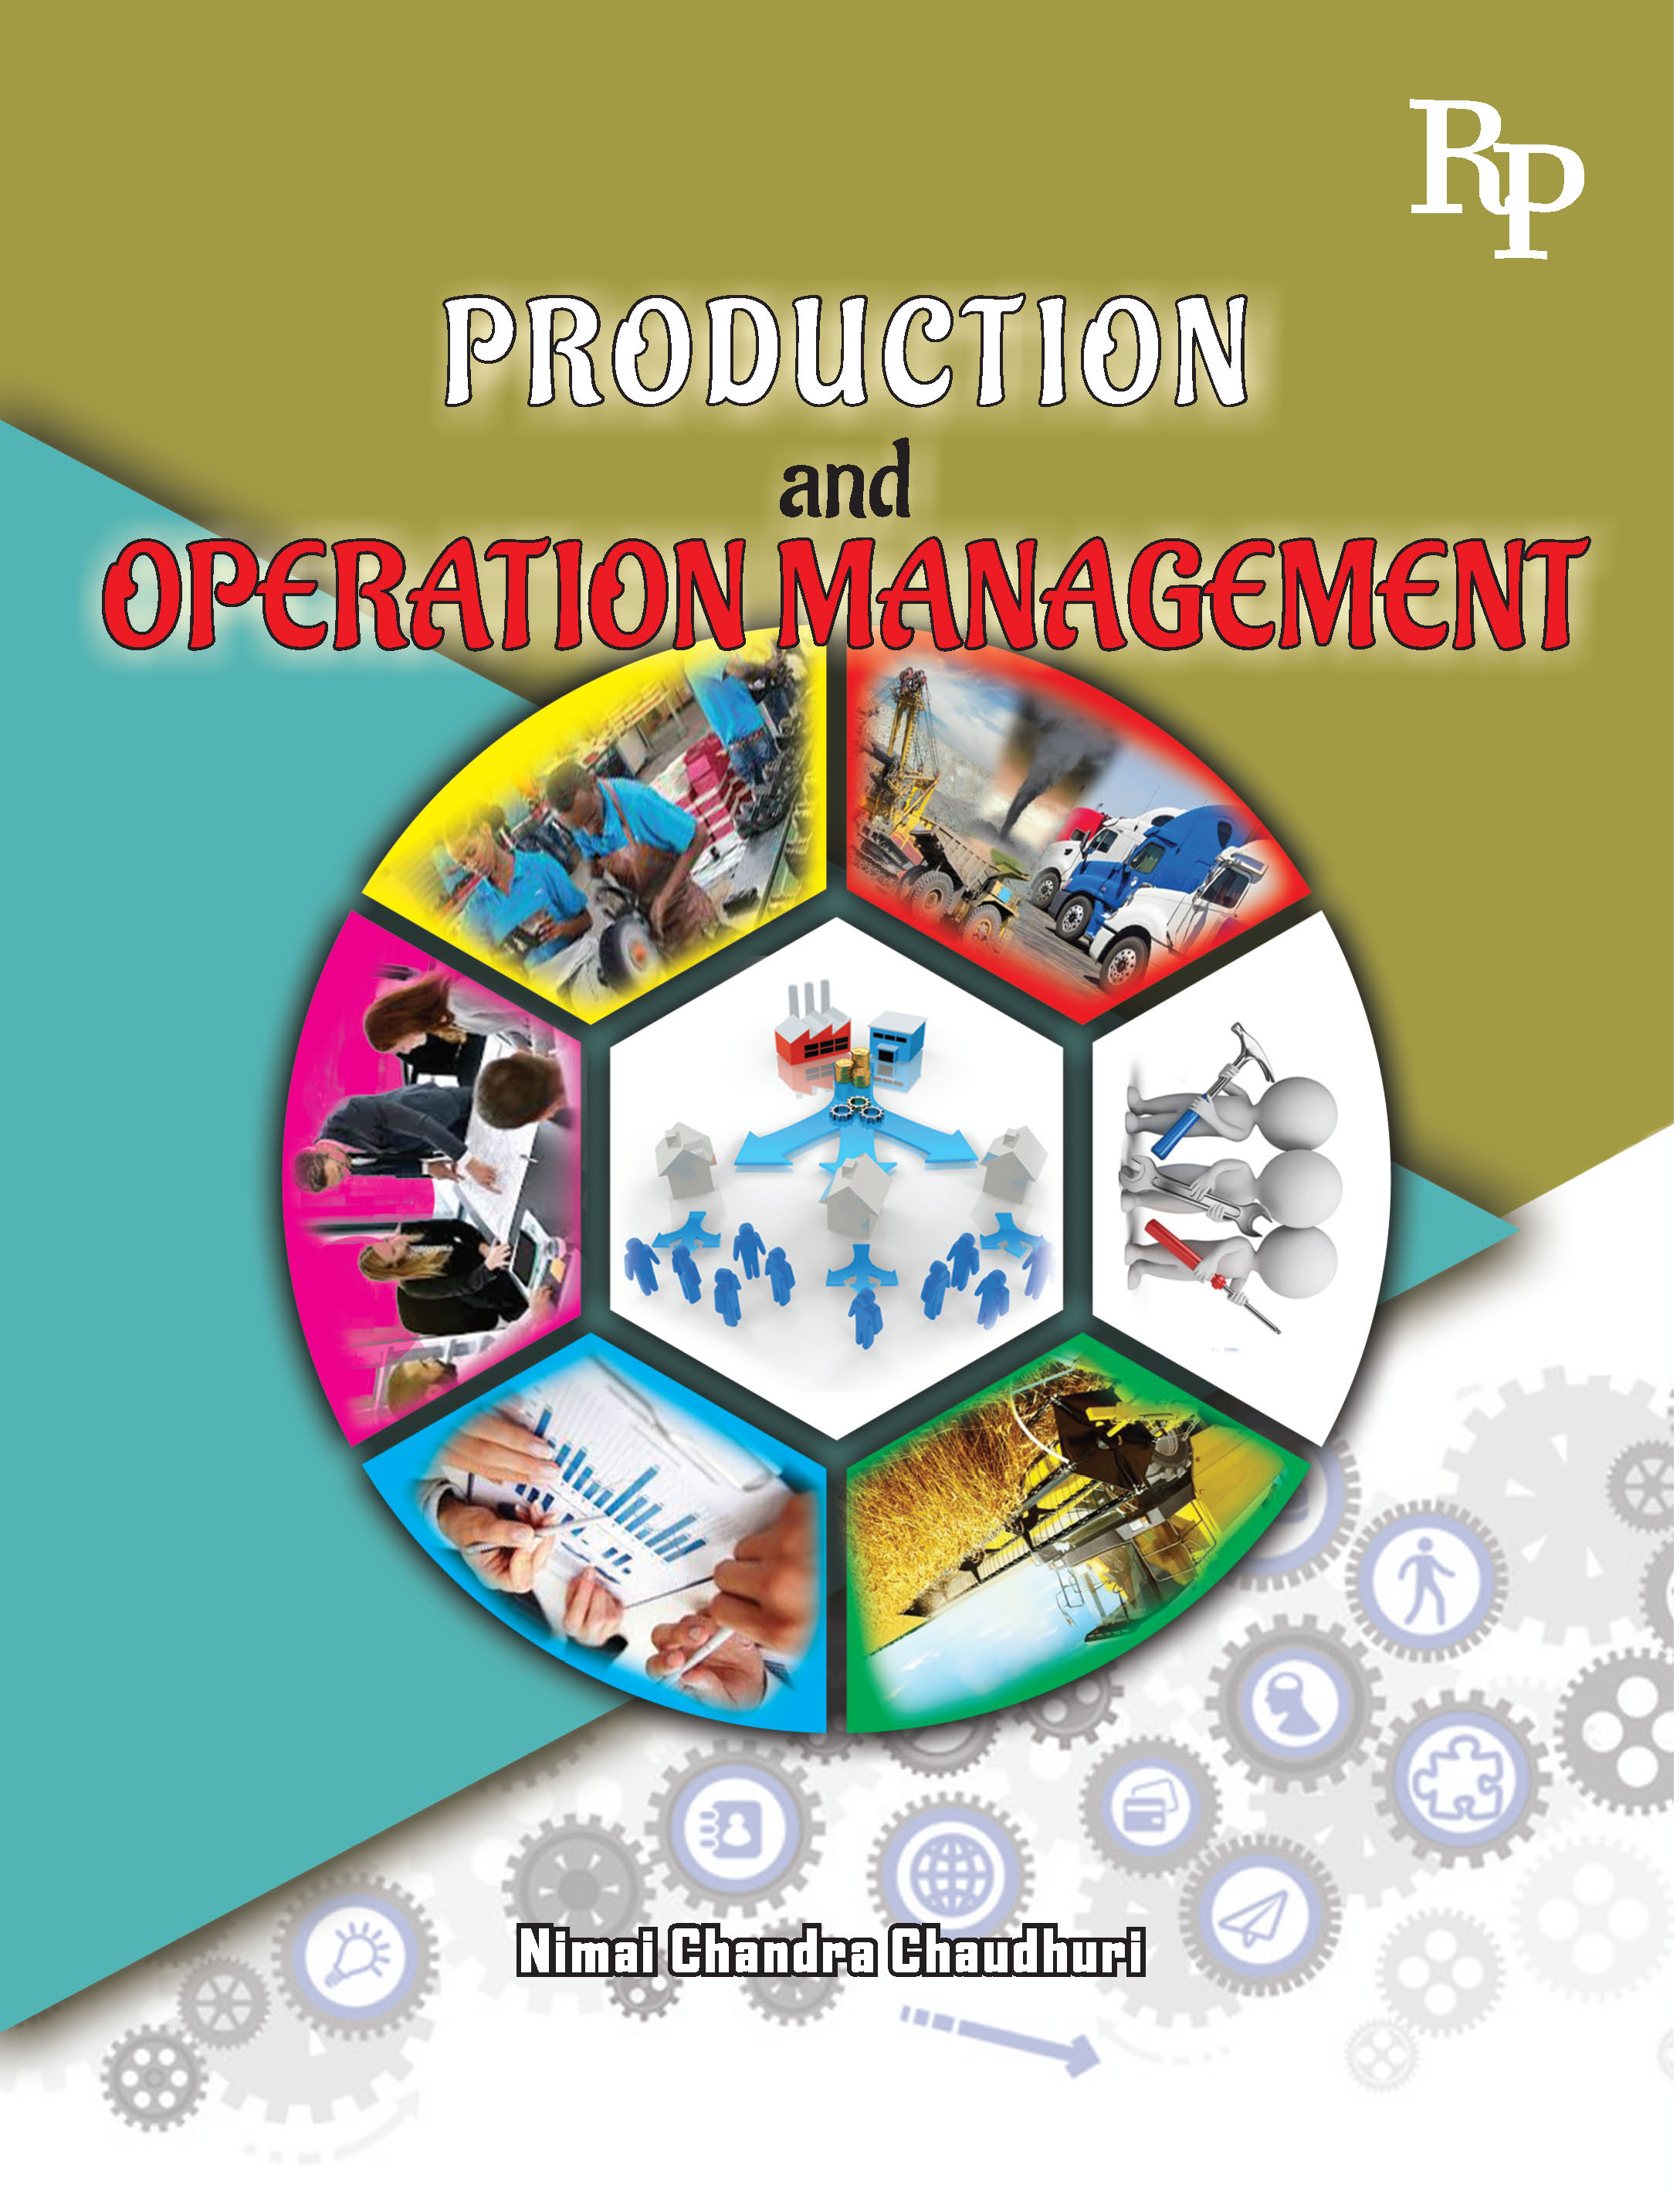 Production and Operation Management.jpg